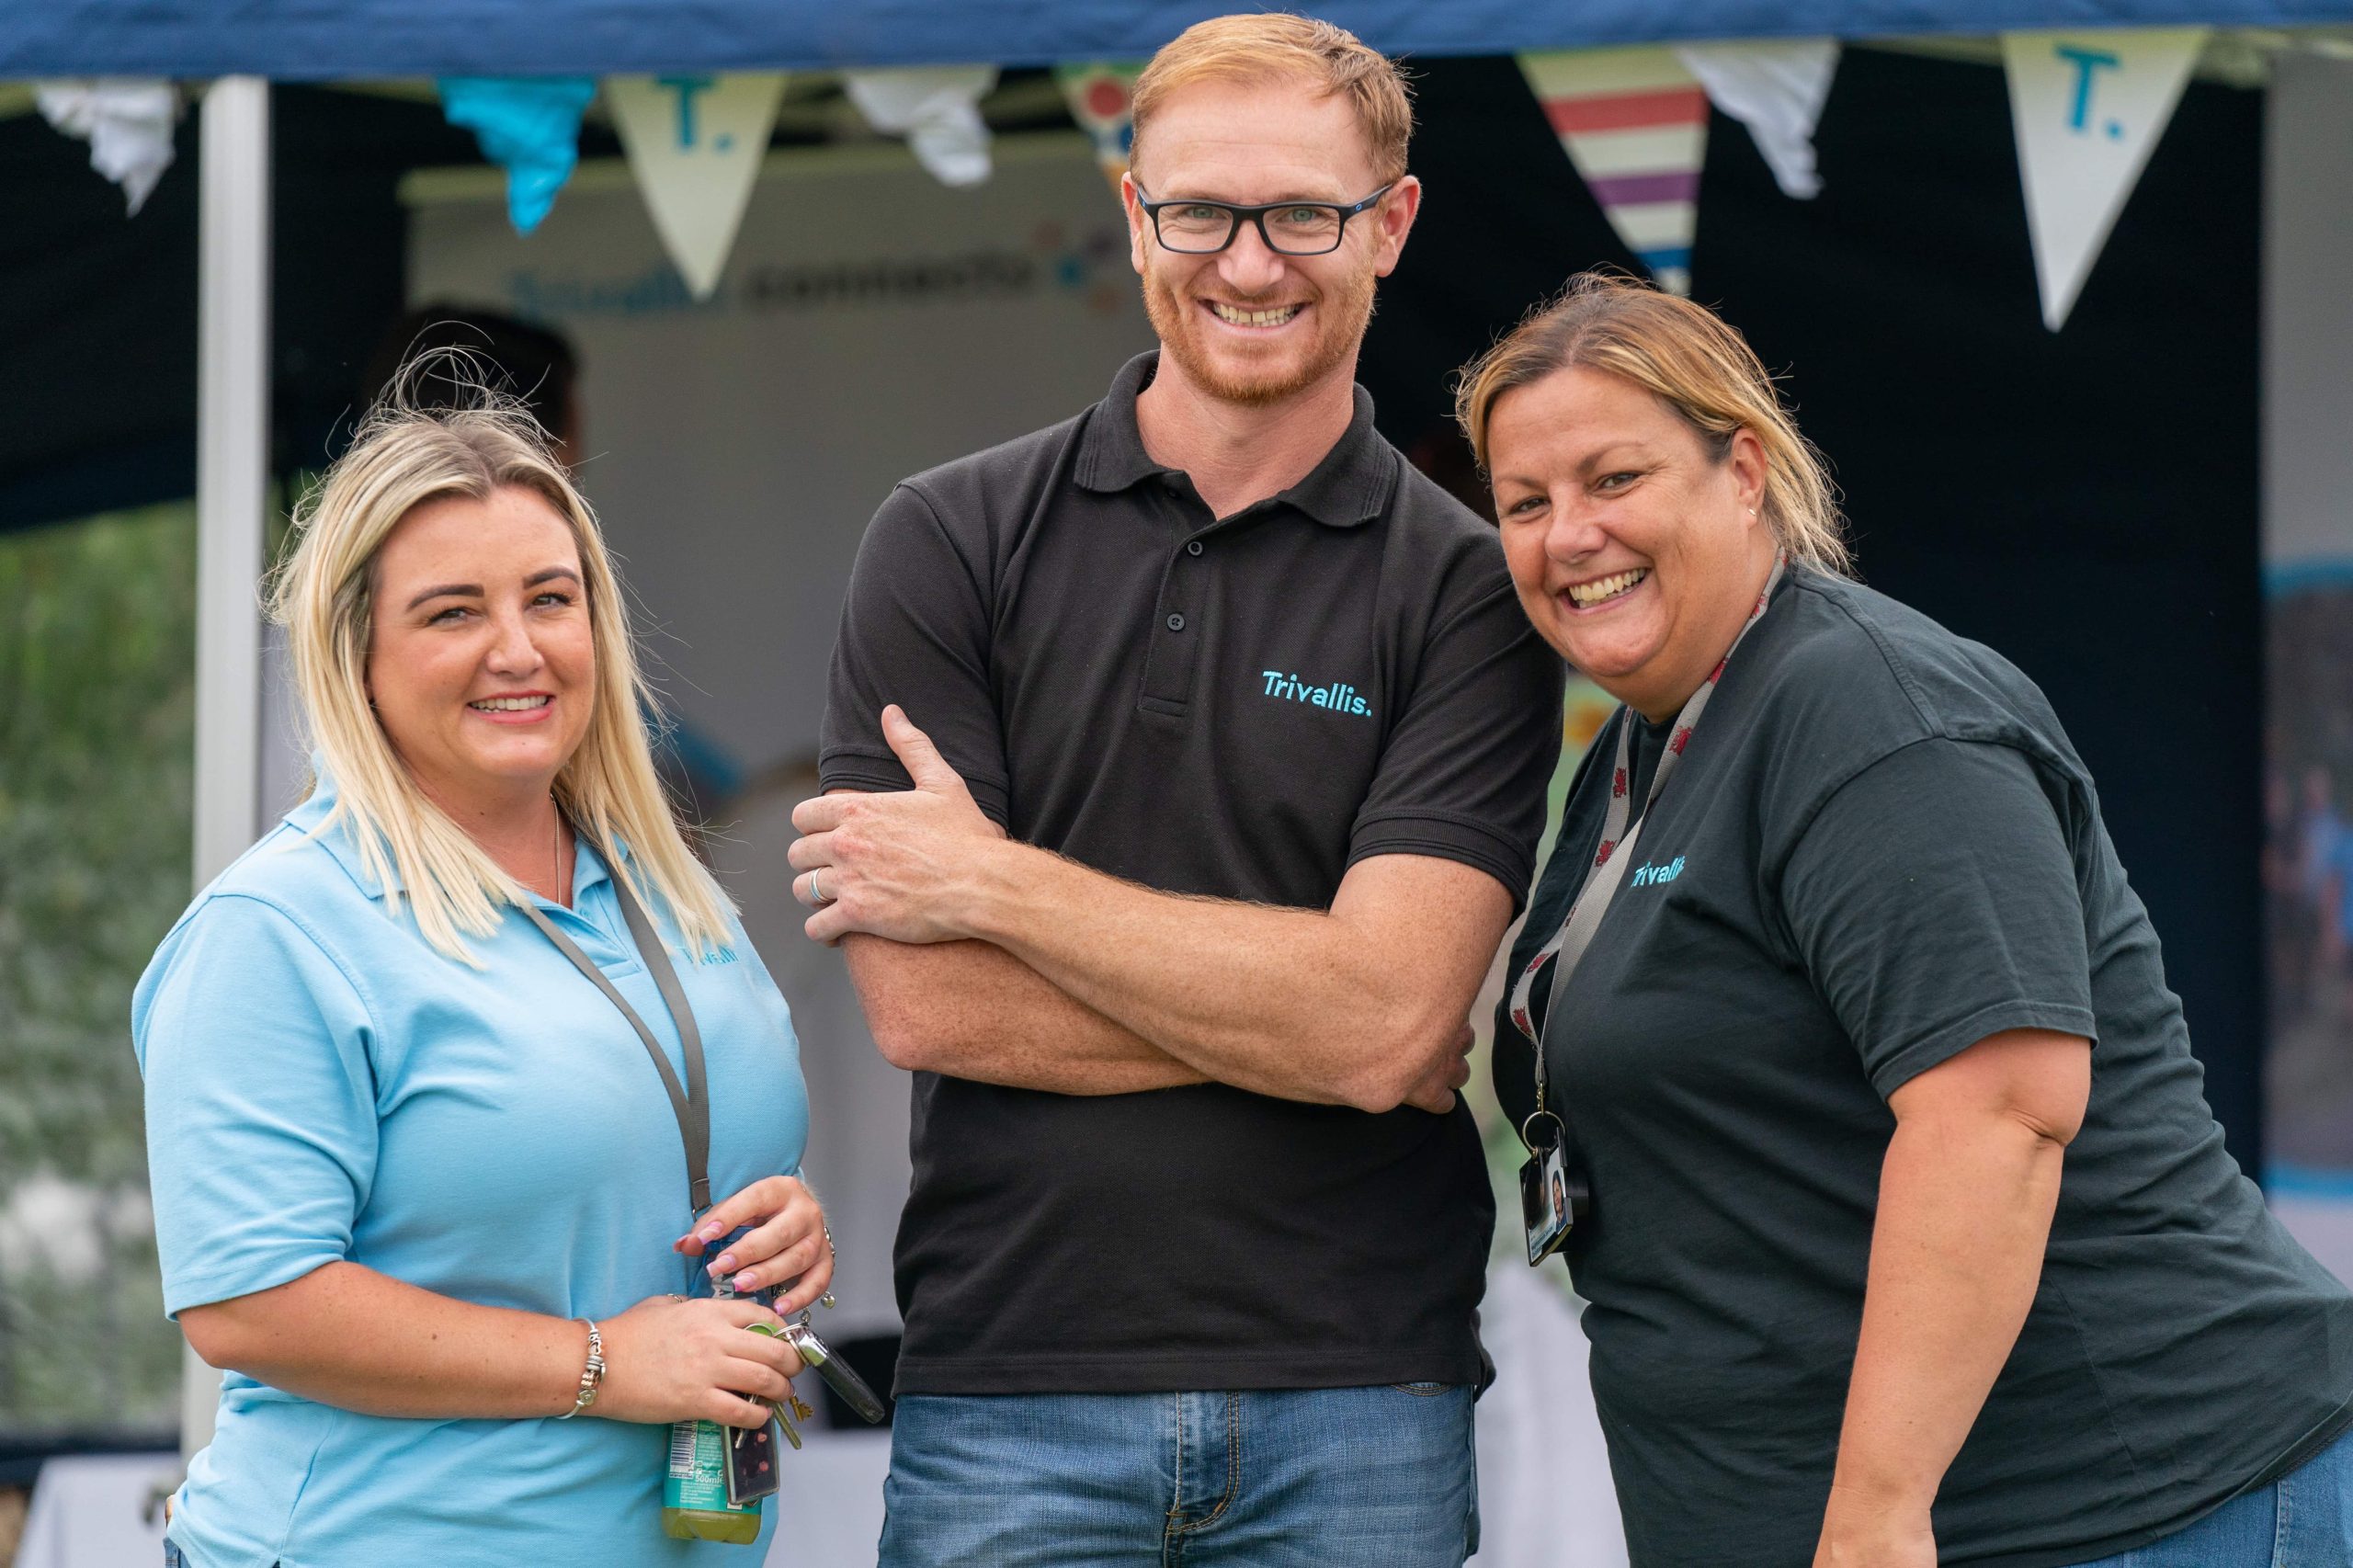 Trivallis Housing Landlord Wales Three smiling colleagues from Trivallis Community Housing posing at an outdoor event, with one woman holding a set of keys and another giving a thumbs-up, suggesting a positive and successful team experience.